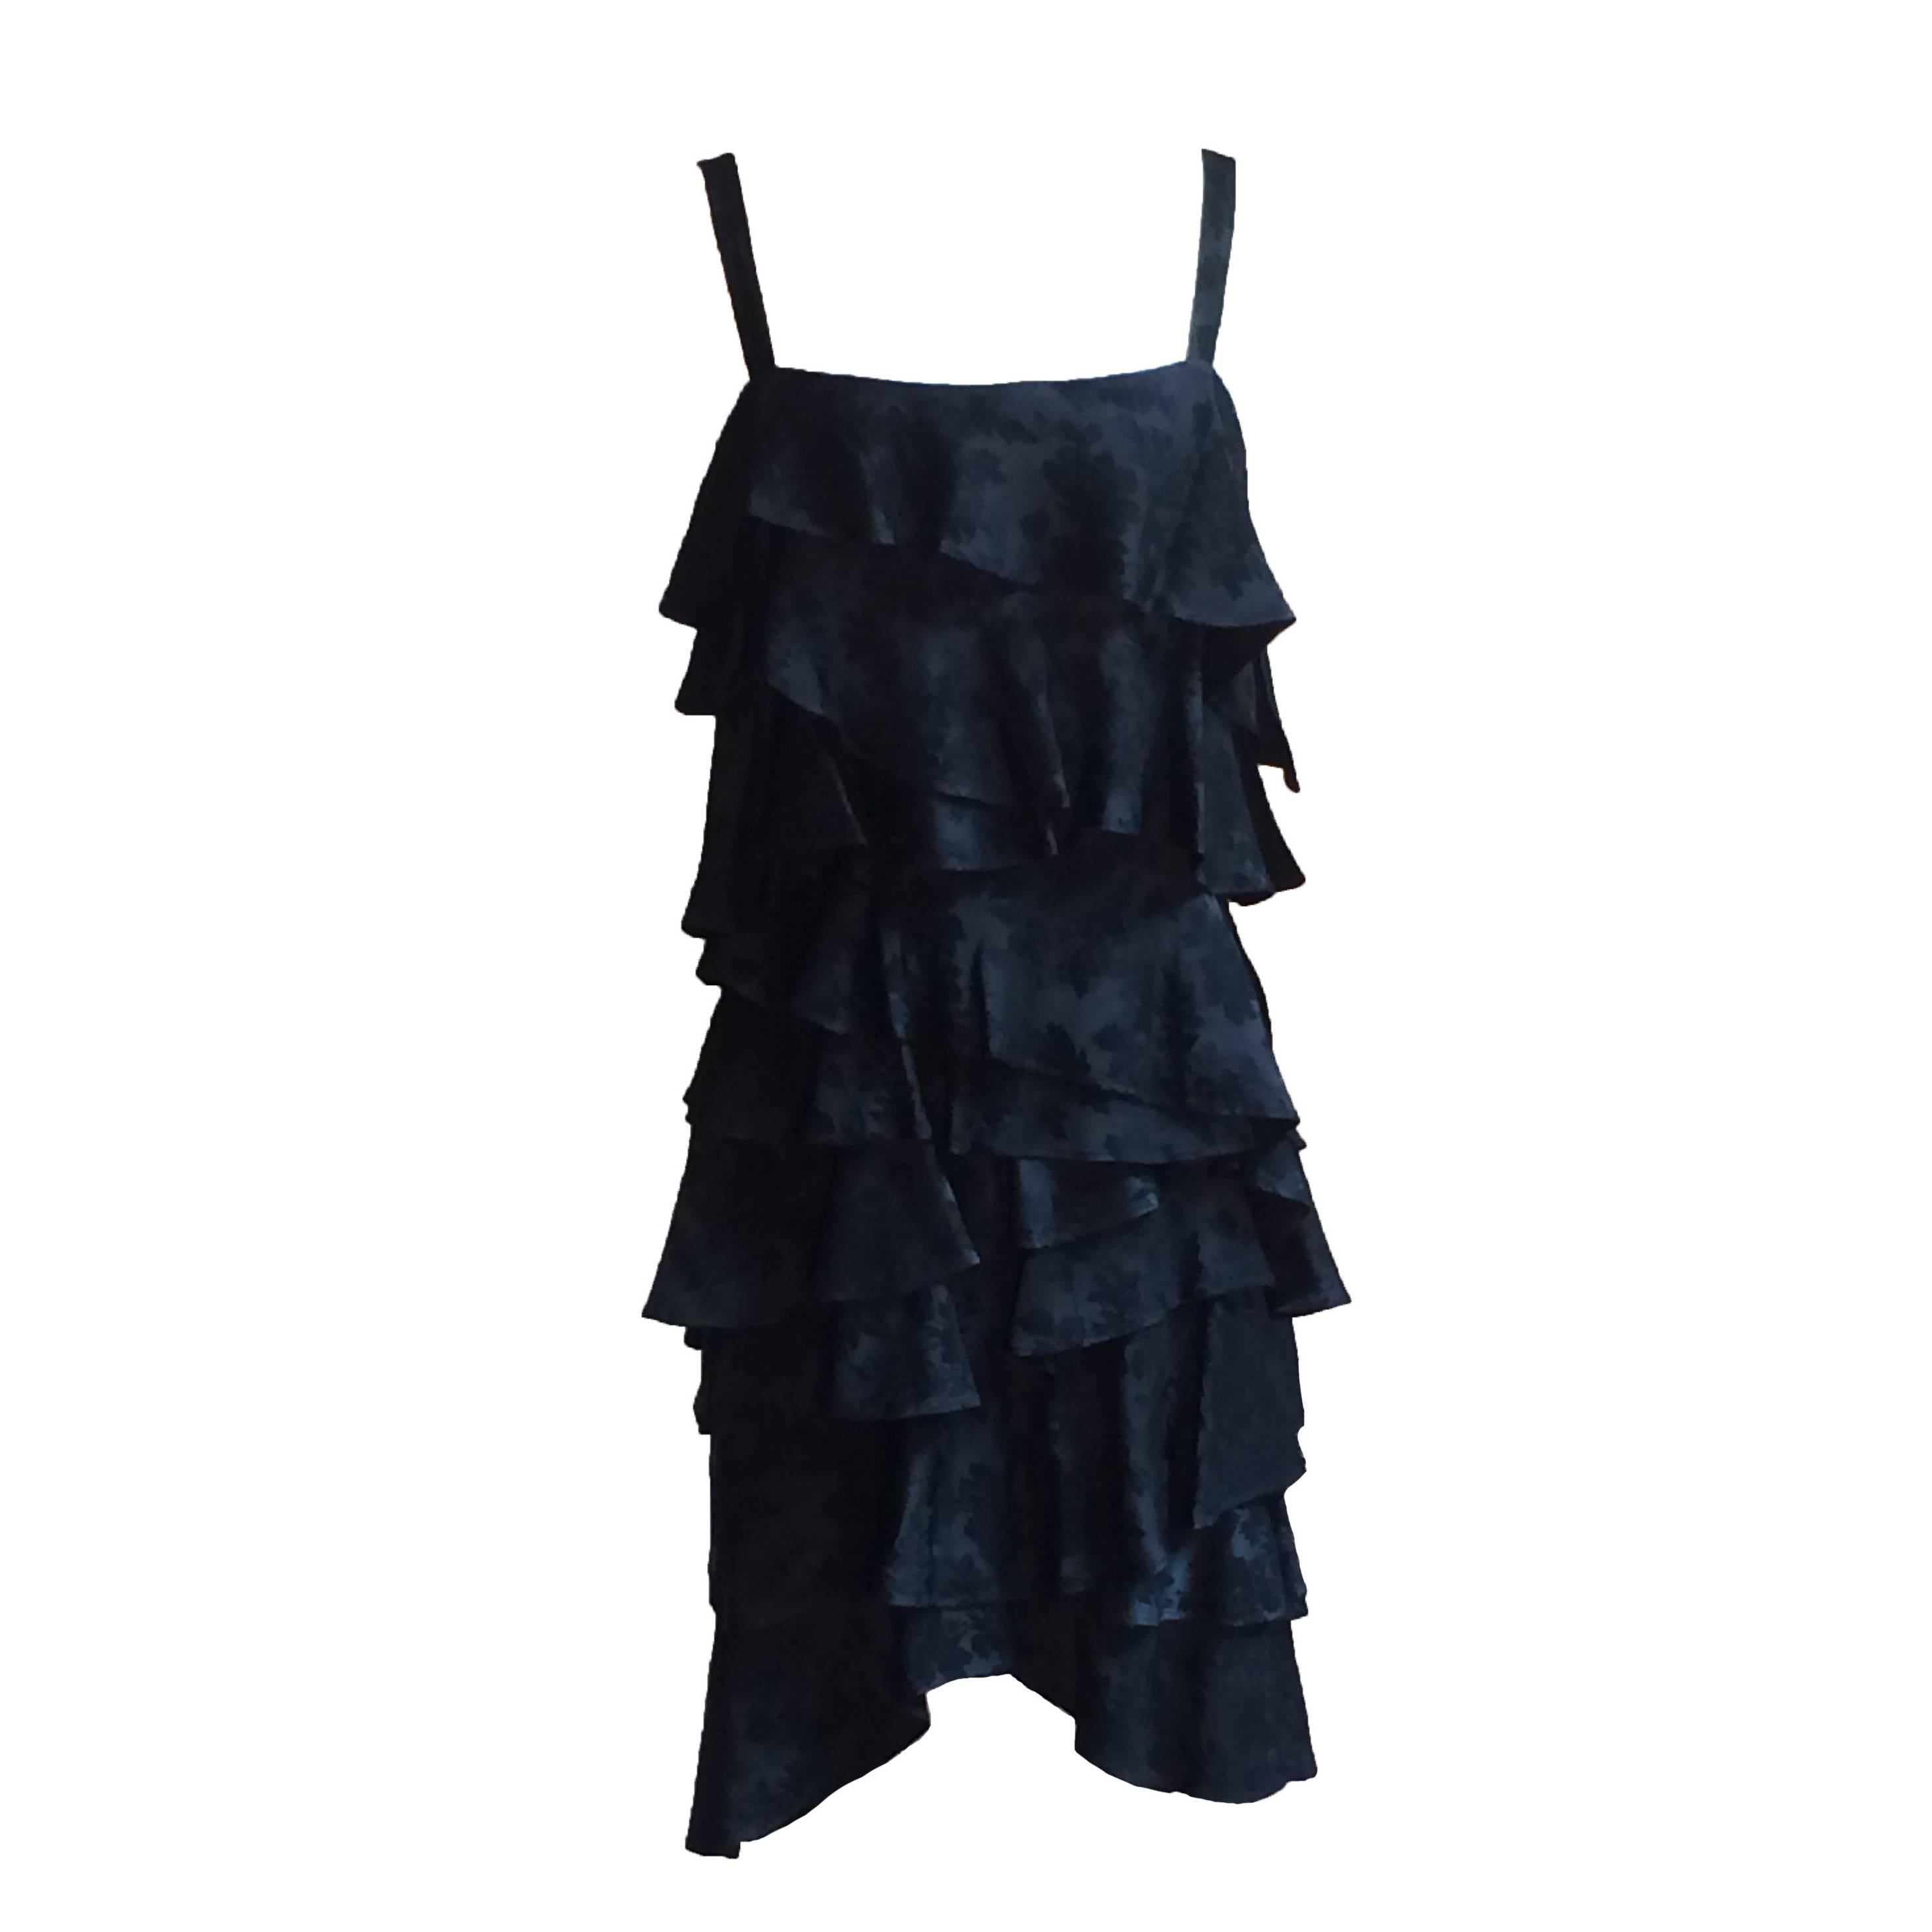 Moschino Couture Vintage 1990s Black Floral Tiered Ruffle Party Dress